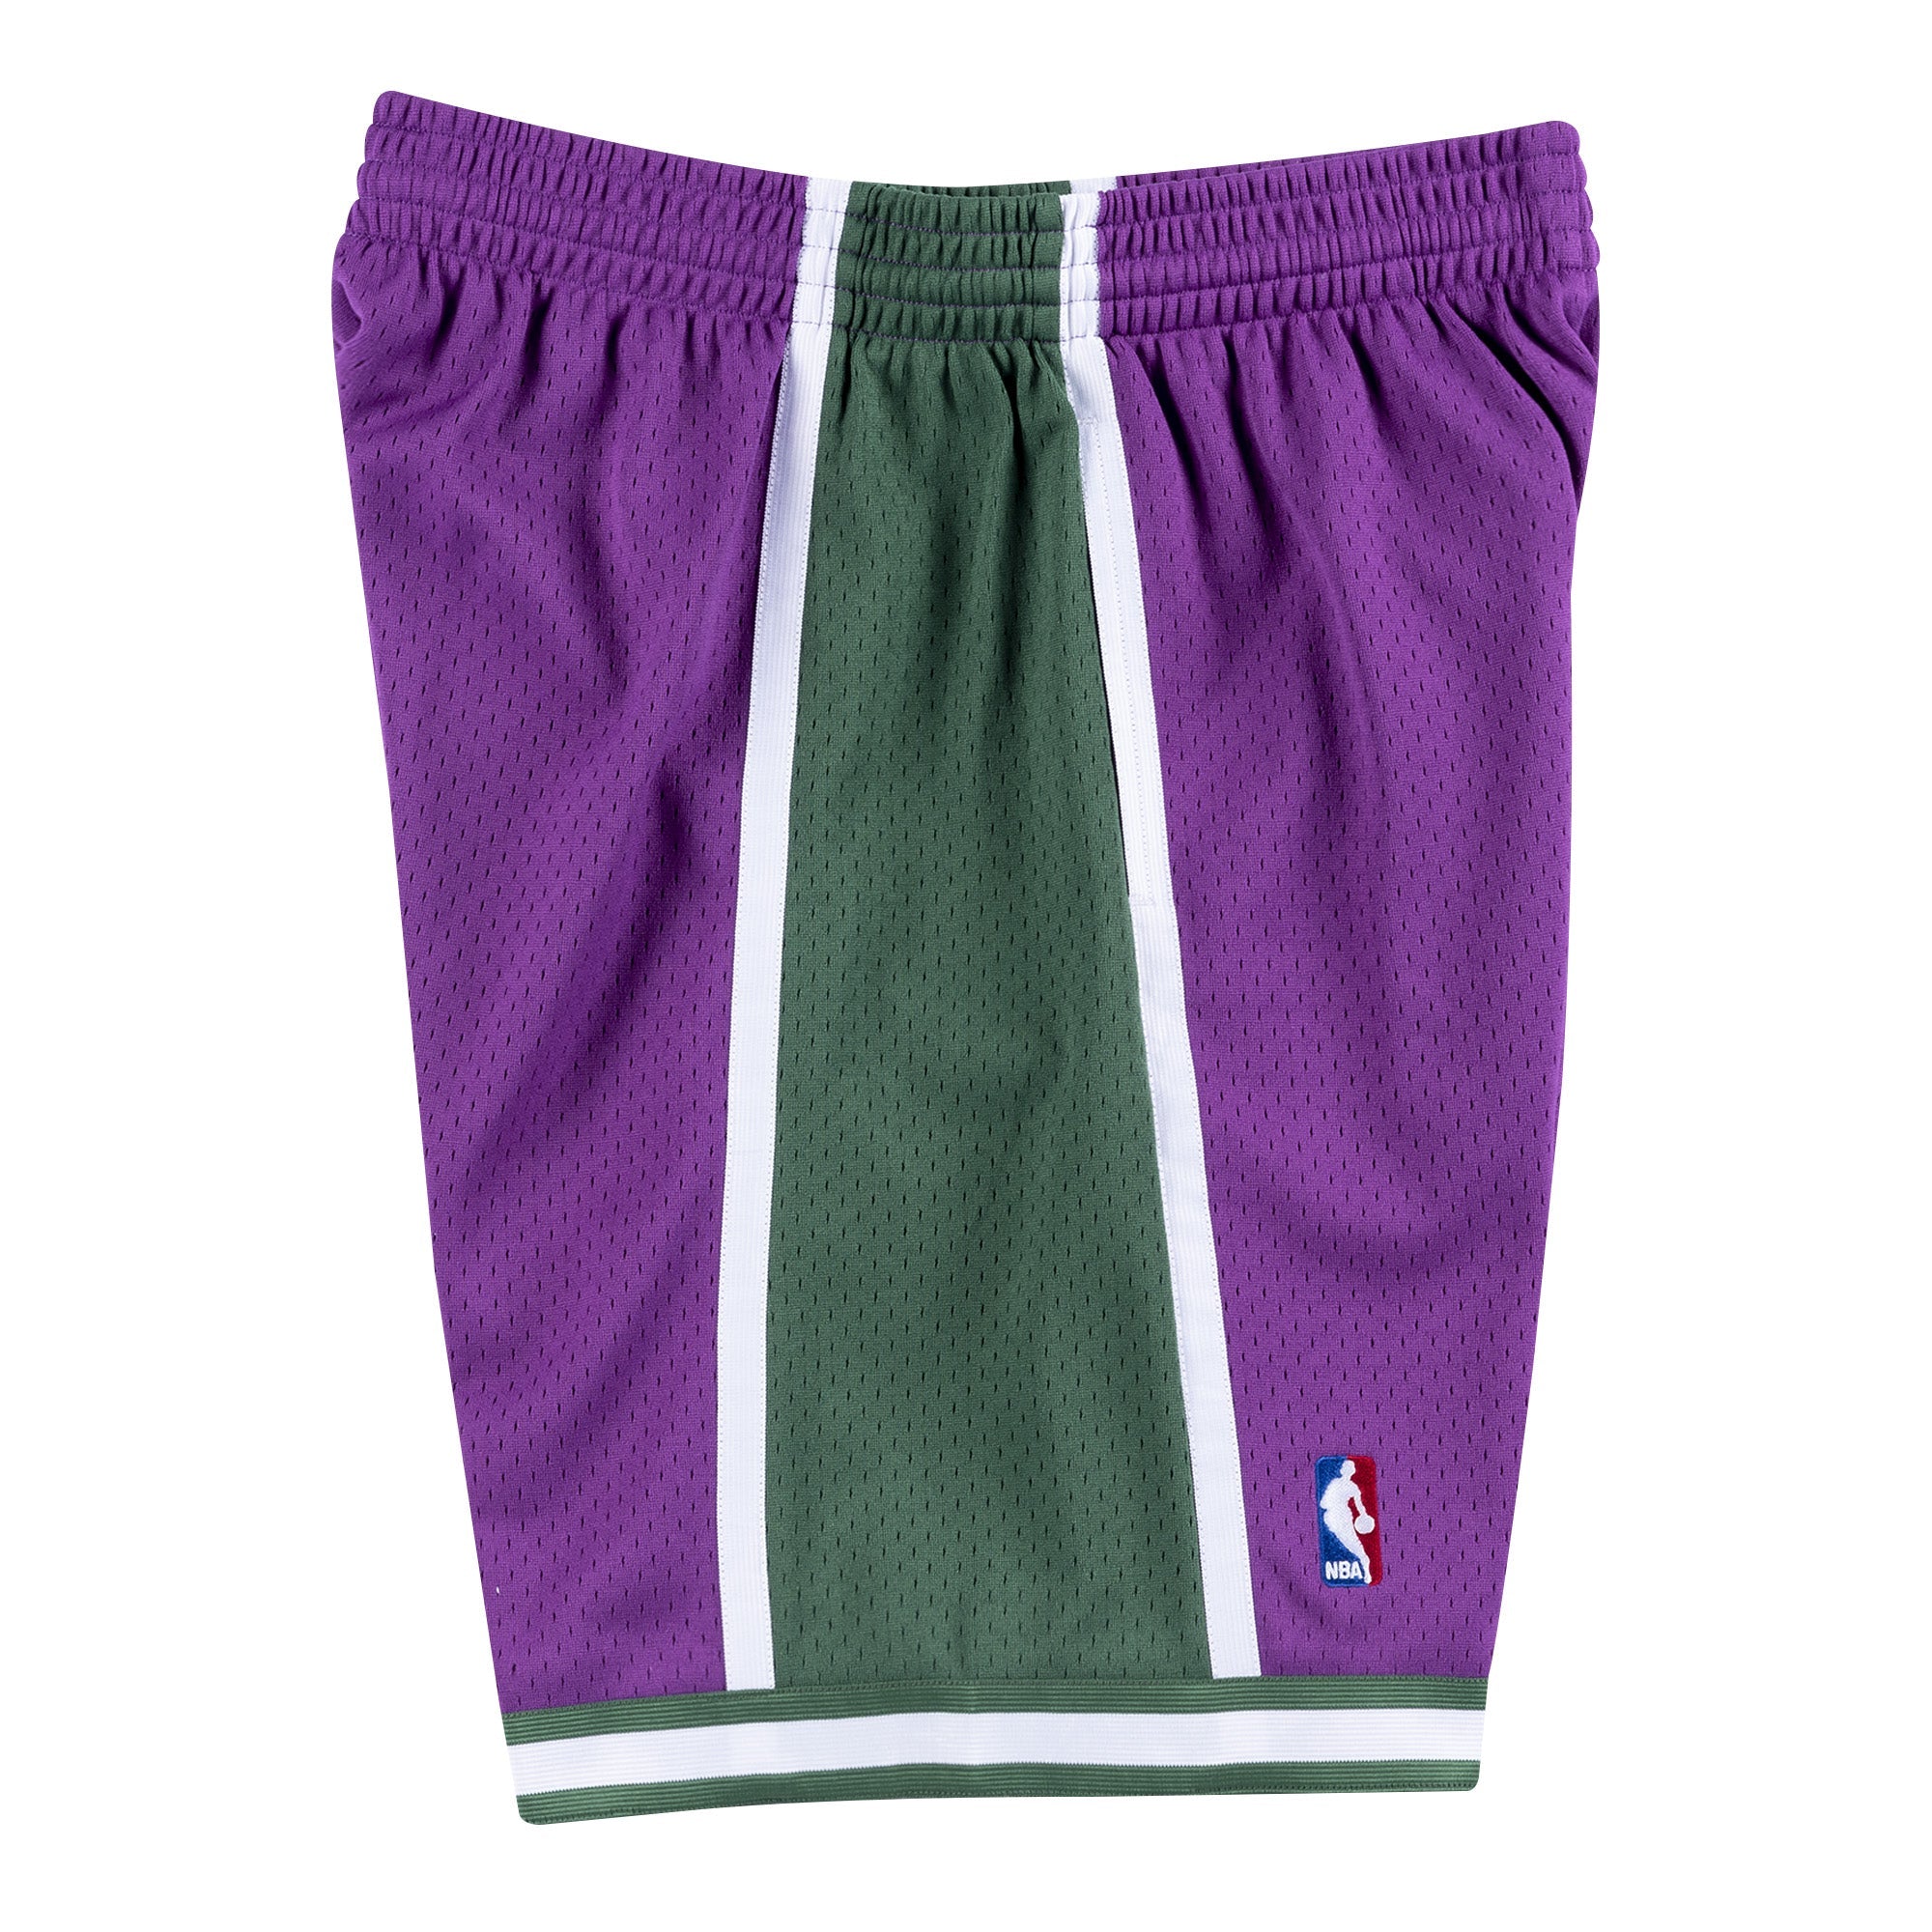 Mitchell & Ness Shorts - Authentic Shorts, NBA Shorts, Swingman Shorts with  Pockets, and More